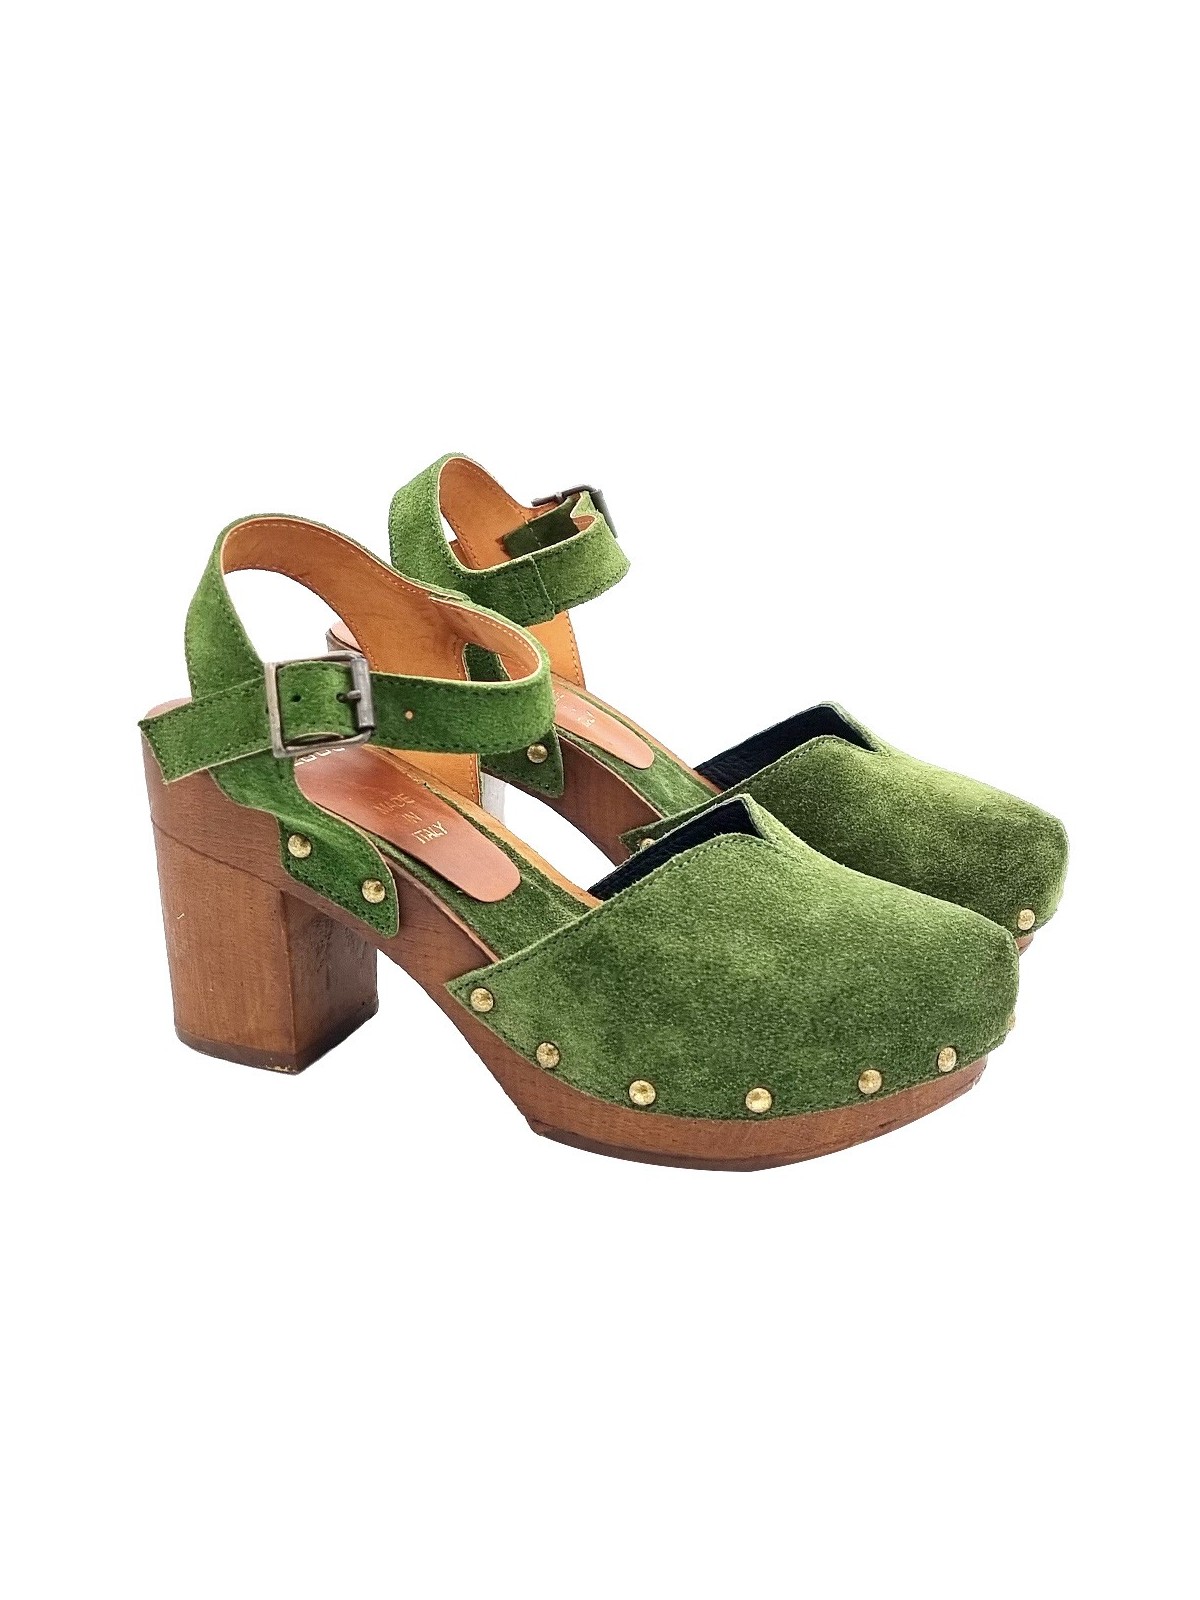 SWEDISH SANDALS IN GREEN SUEDE